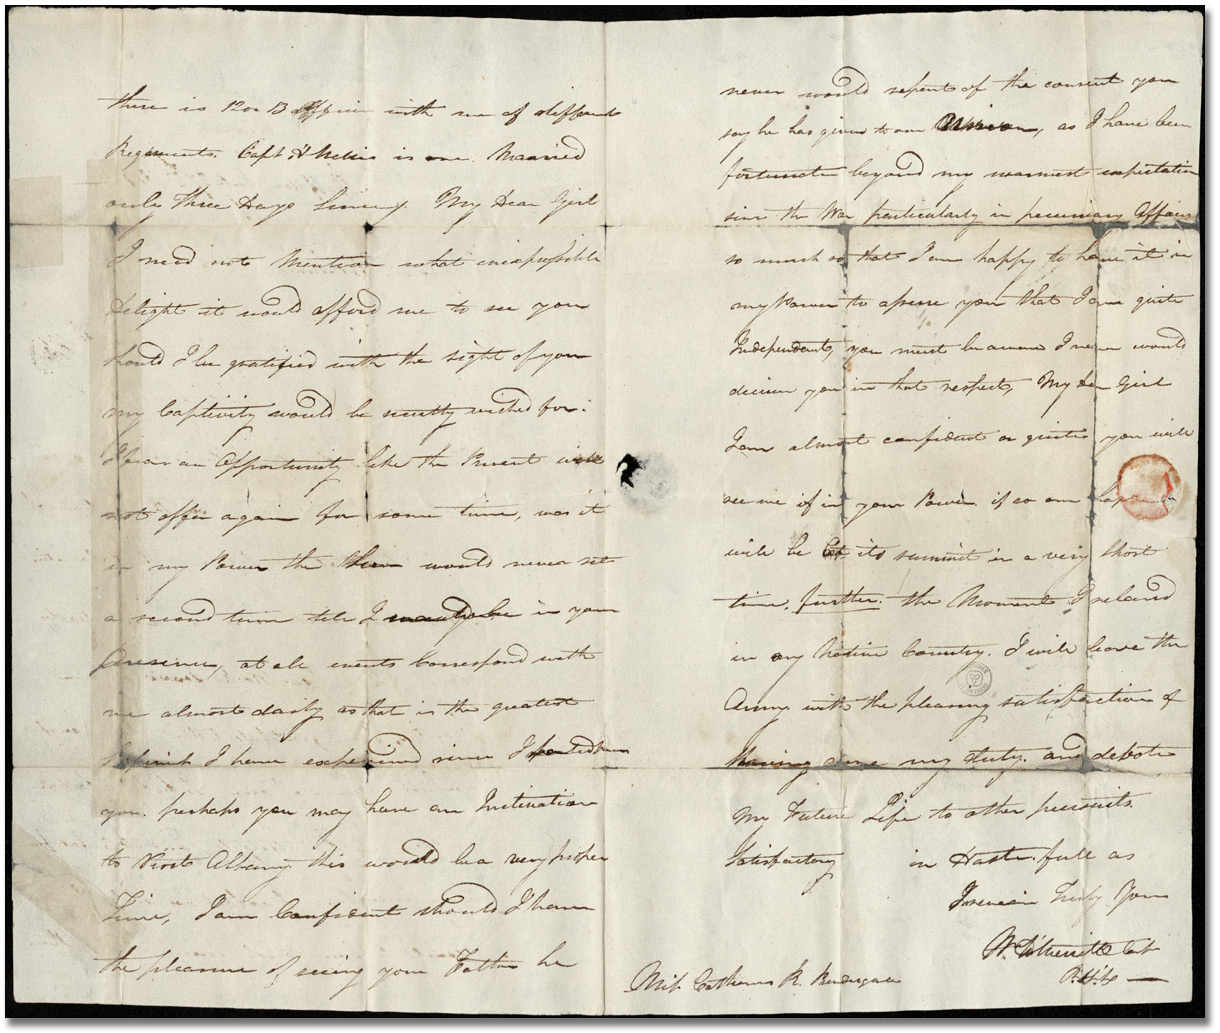 Letter from William Merritt (Buffalo) to Catherine Prendergast, July 27, 1814 (Pages 2 and 3)